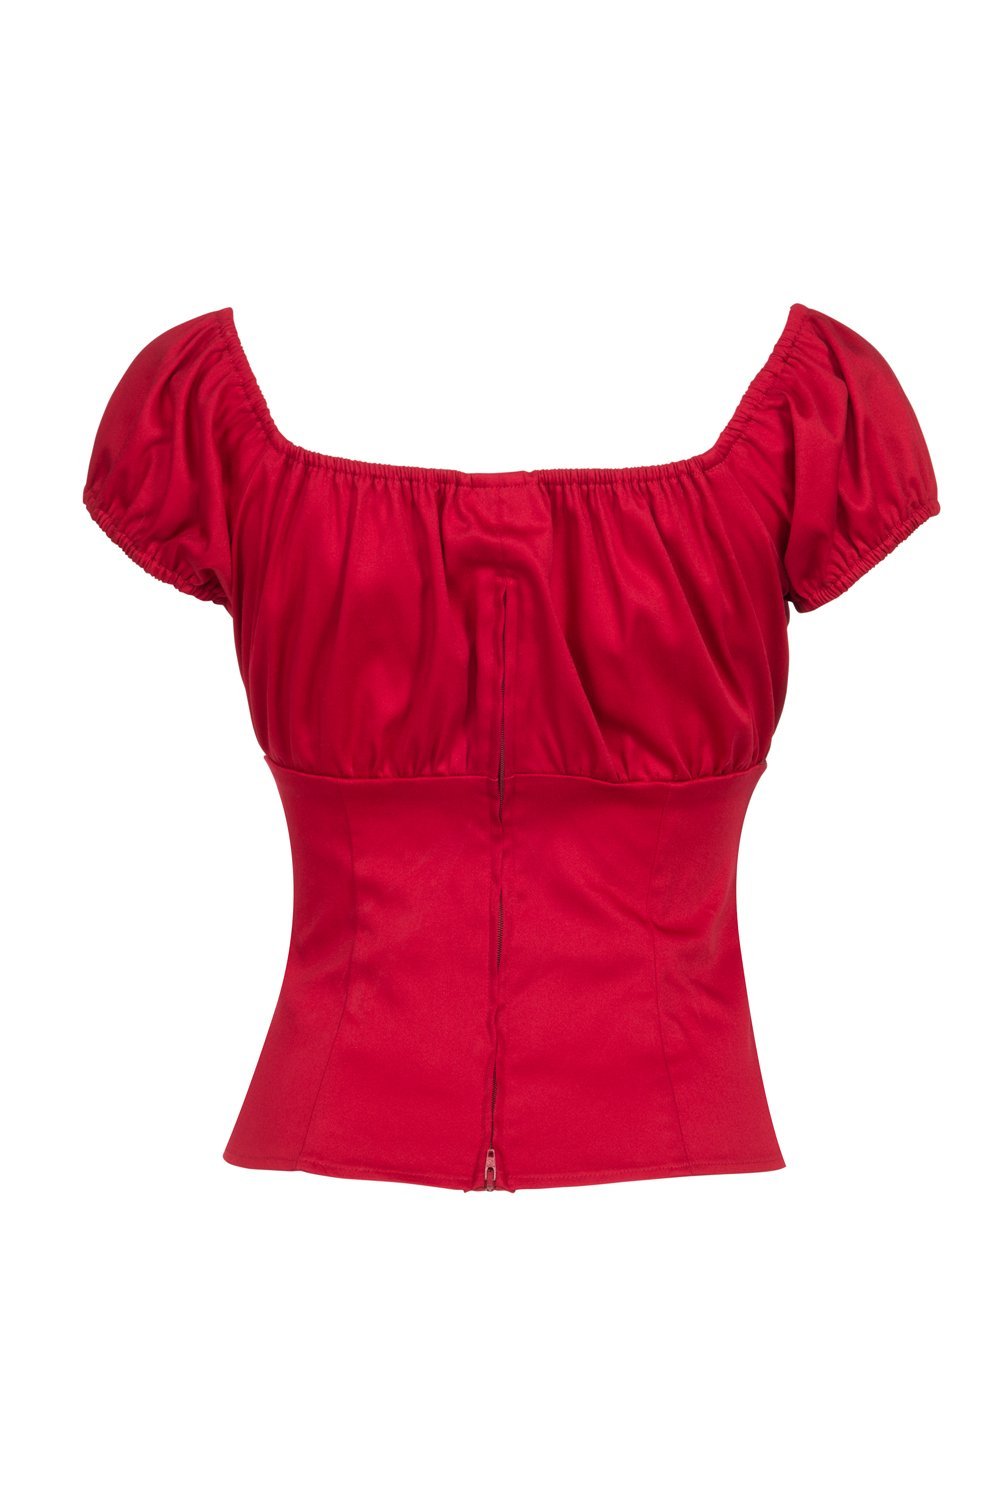 red peasant blouse